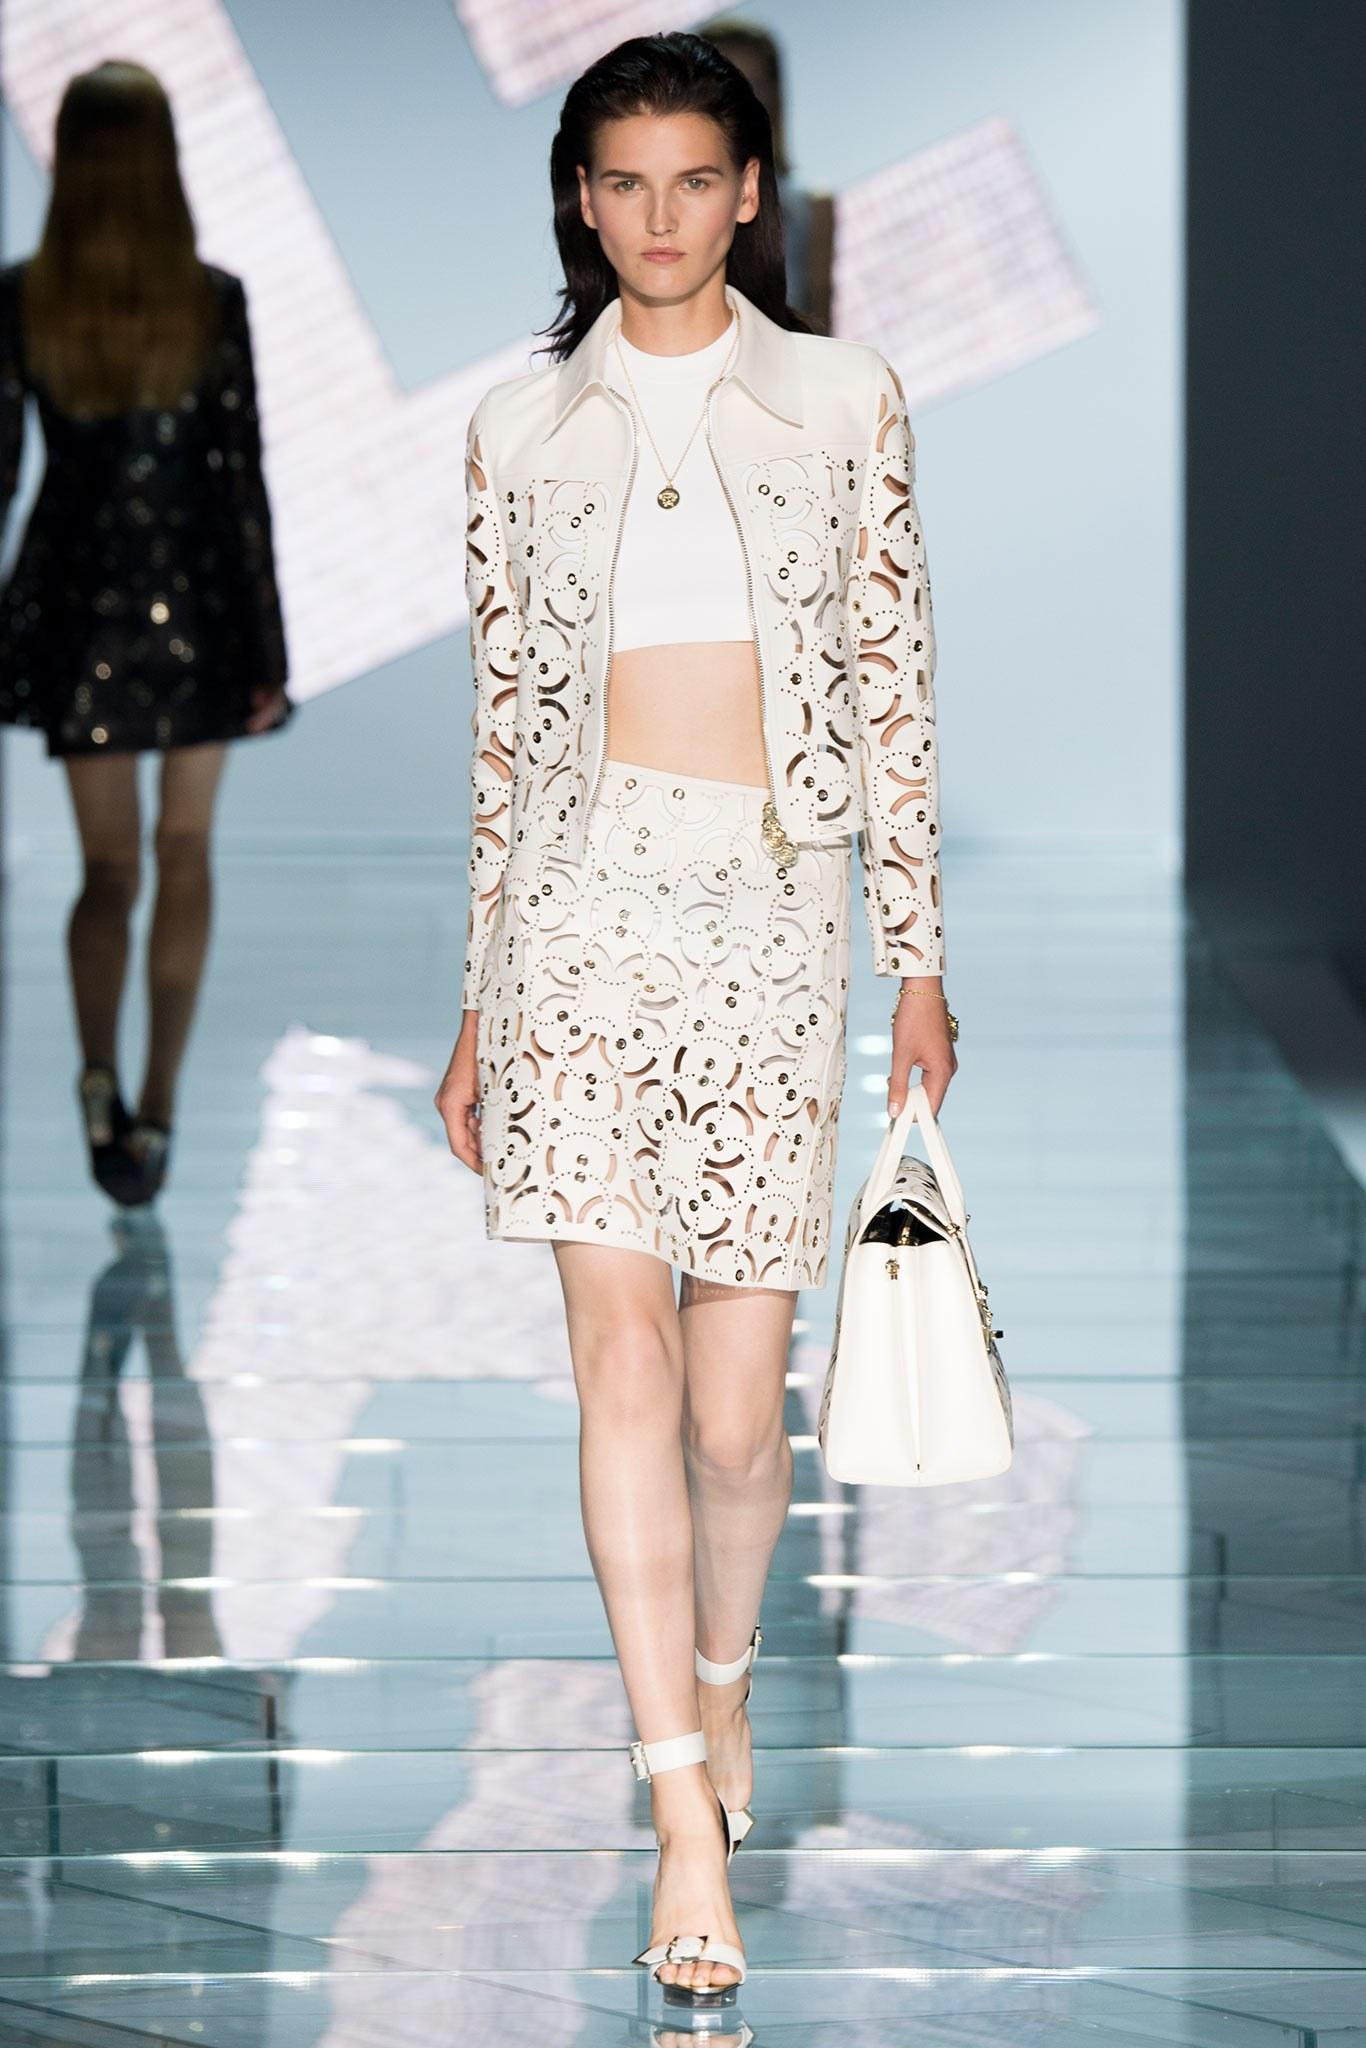 New Versace Runway White Leather Skirt
S/S 2015 Collection
Designer size 40 - US 6
100% Leather, Laser Cut, Metal Silver Tone Grommet Accents, No Lining, Side Zipper Closure, A-Line Style.
Measurements: Waist - 30 inches, Length - 17.5